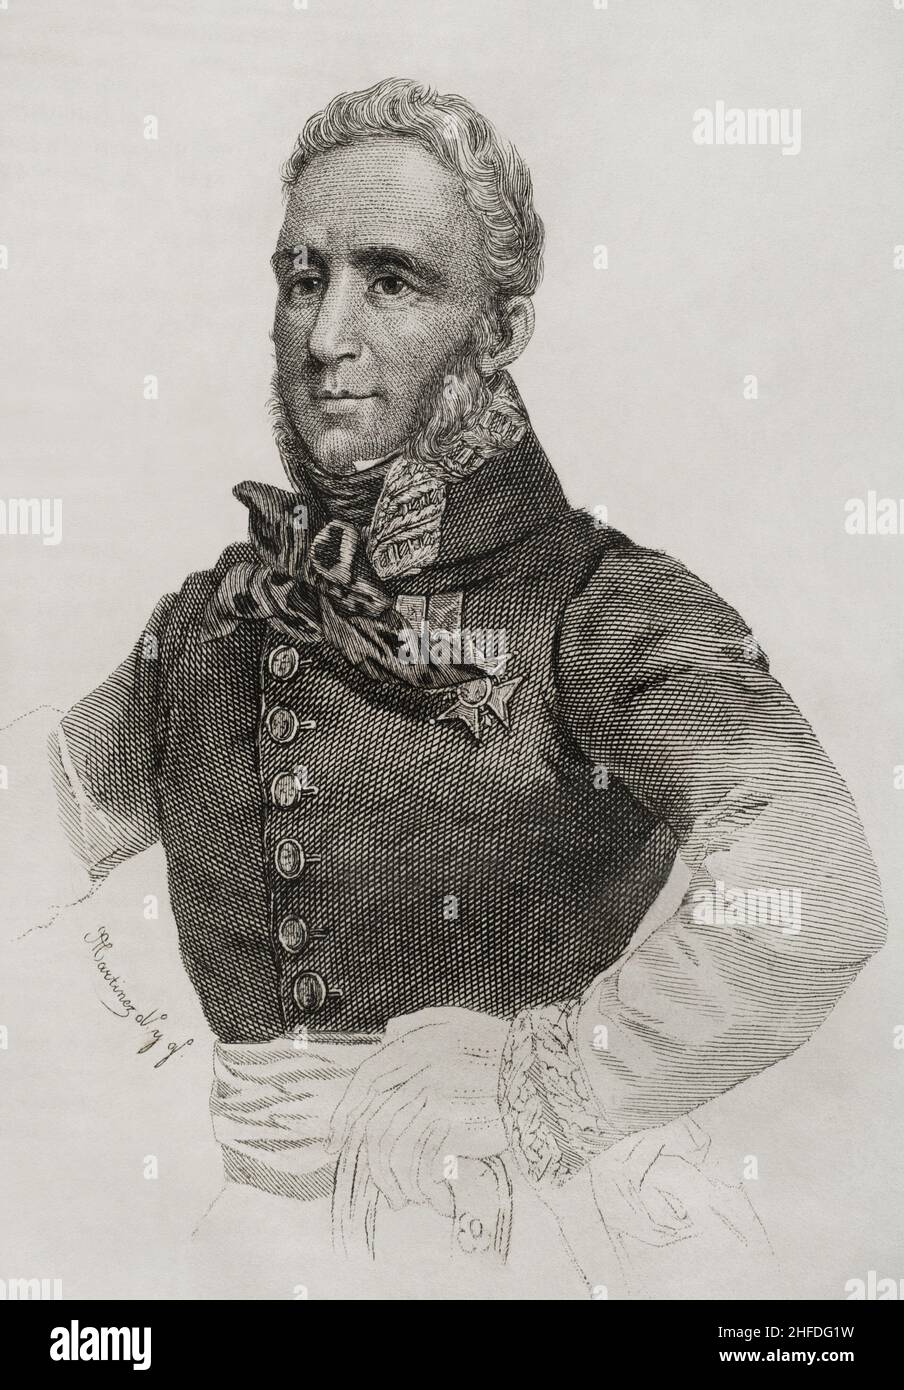 Francisco Espoz y Mina (1781-1836). Spanish military. Leader of the guerrillas of Navarre during the Spanish War of Independence (1808-1814). He fought on the Isabeline army in the First Carlist War (1833-1840), being the most responsible for the fight in the north of Spain against the Carlists. Portrait. Engraving by Martínez. Panorama Español, Crónica Contemporánea. Volume III. Madrid, 1845. Author: Martinez. 19th century-Spanish engraver. Stock Photo